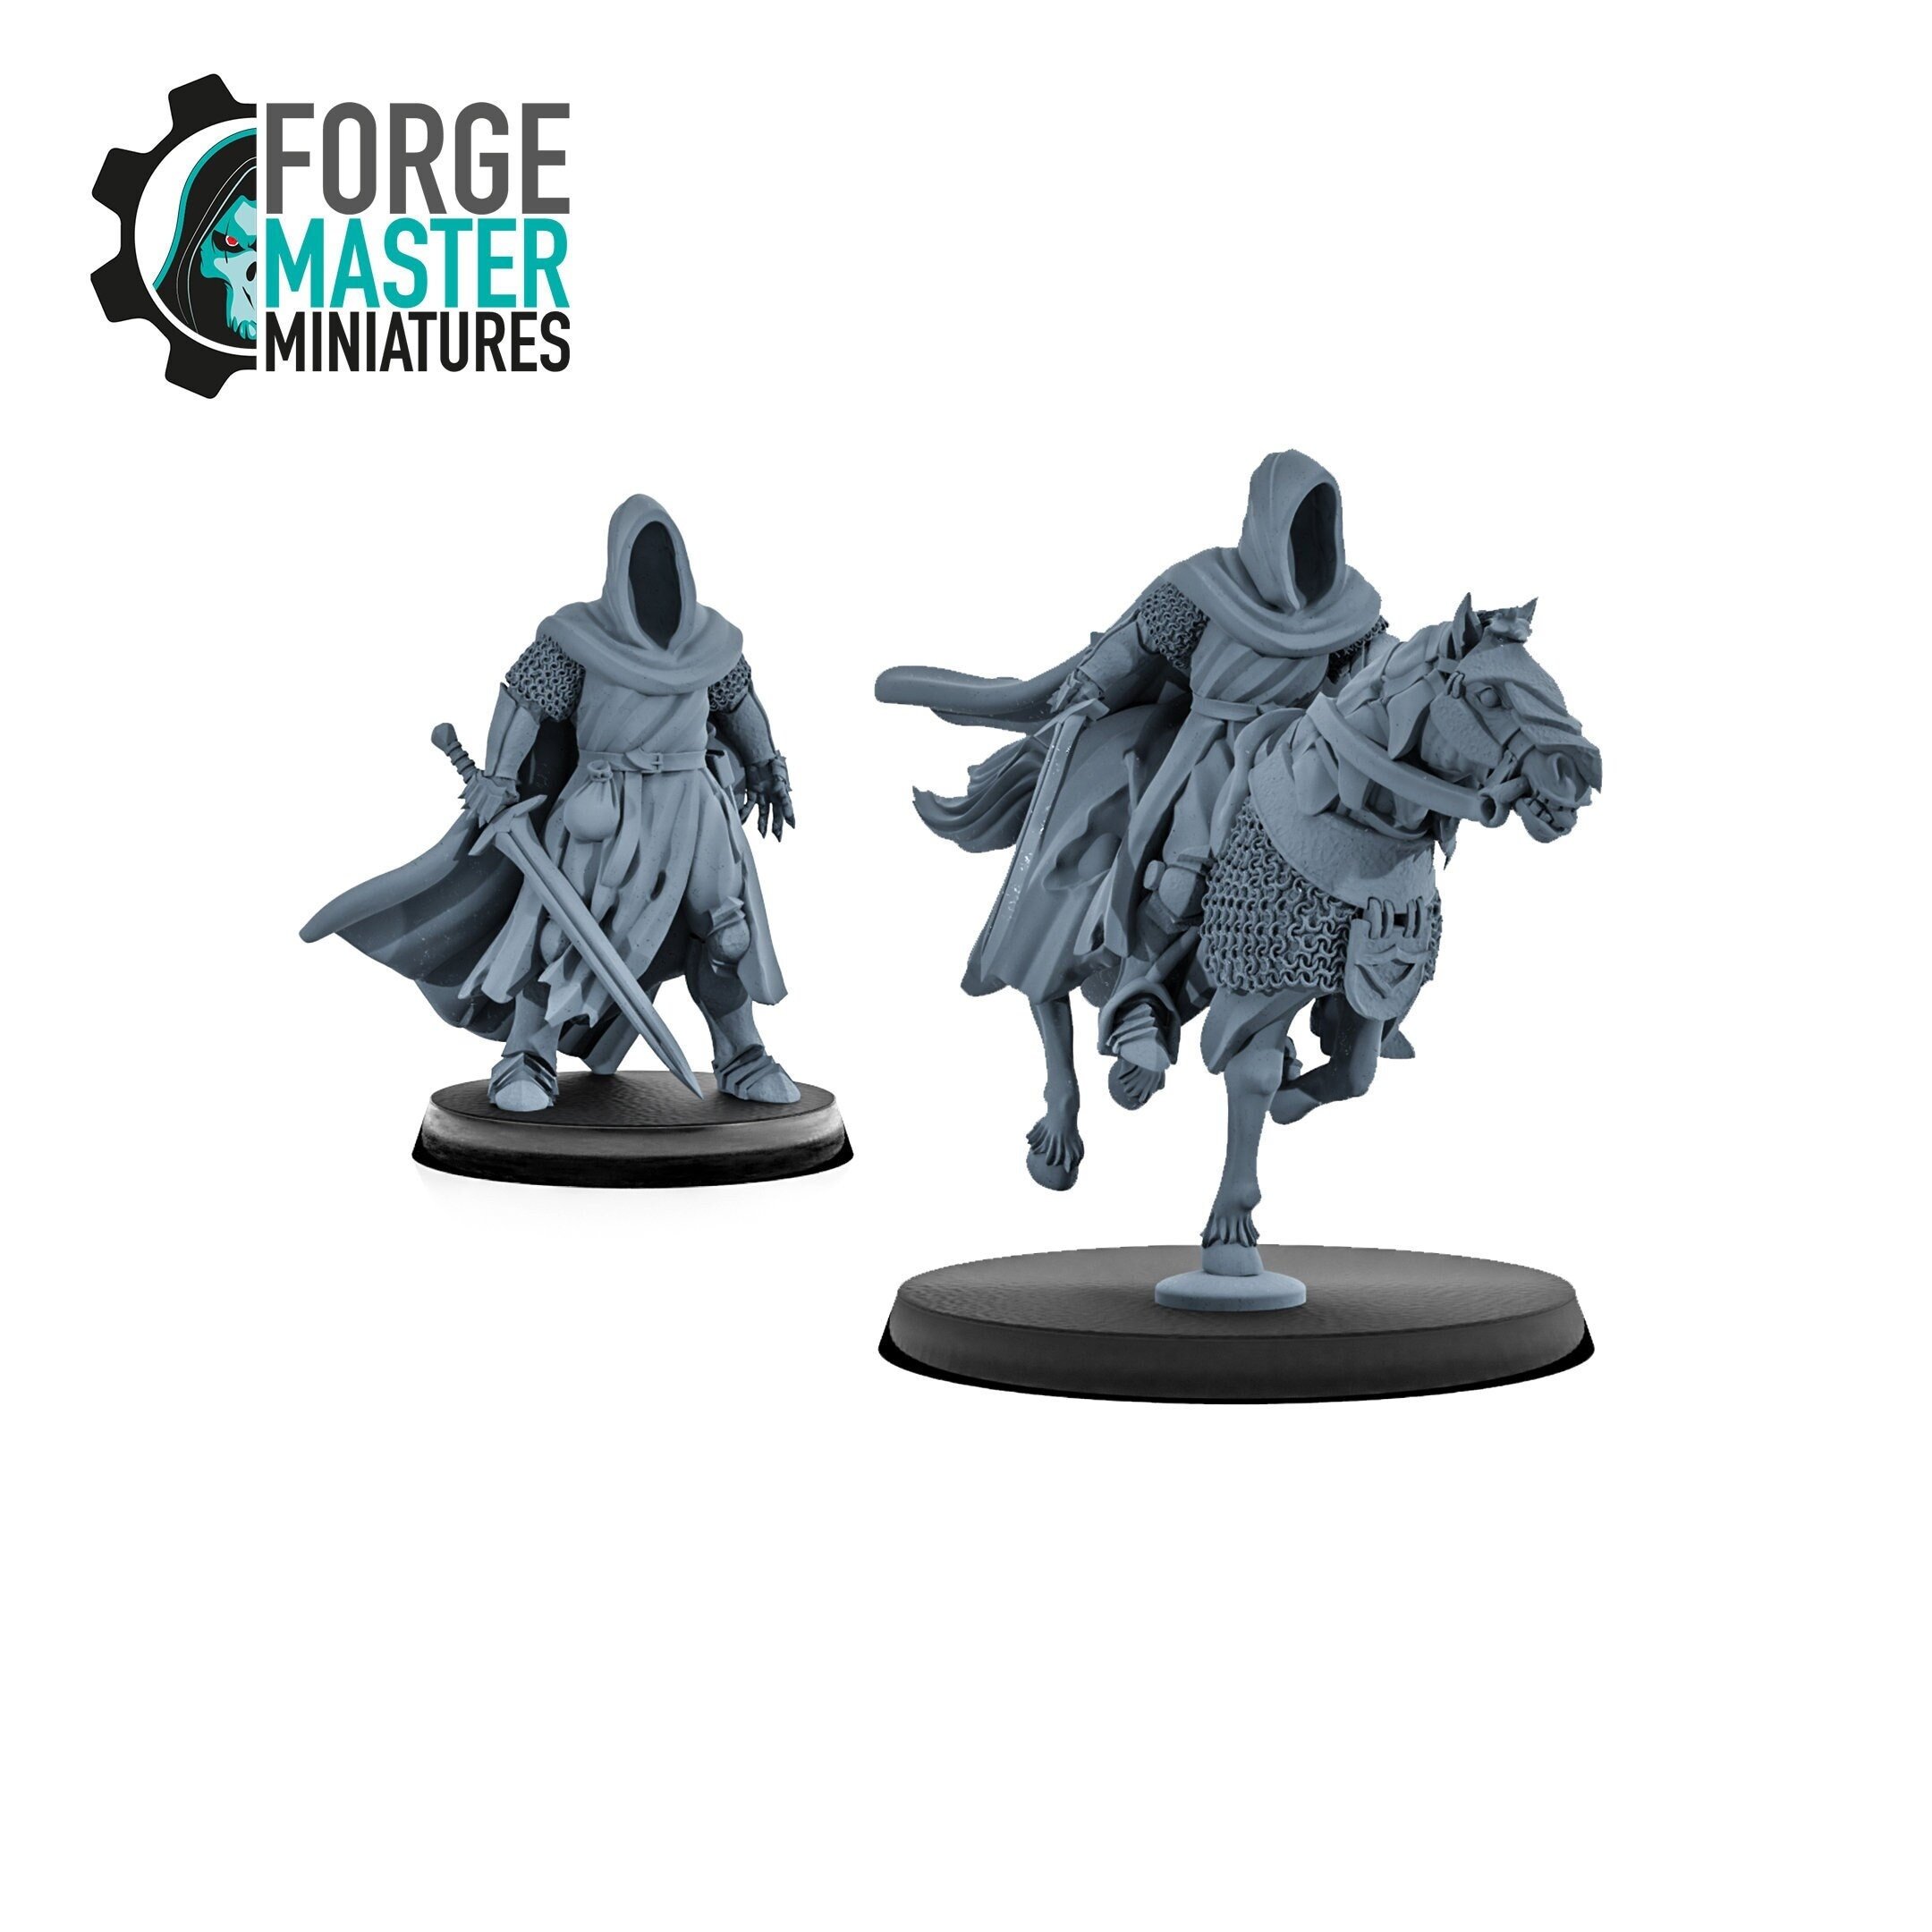 Night Lord Wraith wargaming miniature by Kzk Minis 3D Printed by Forgemaster Miniatures